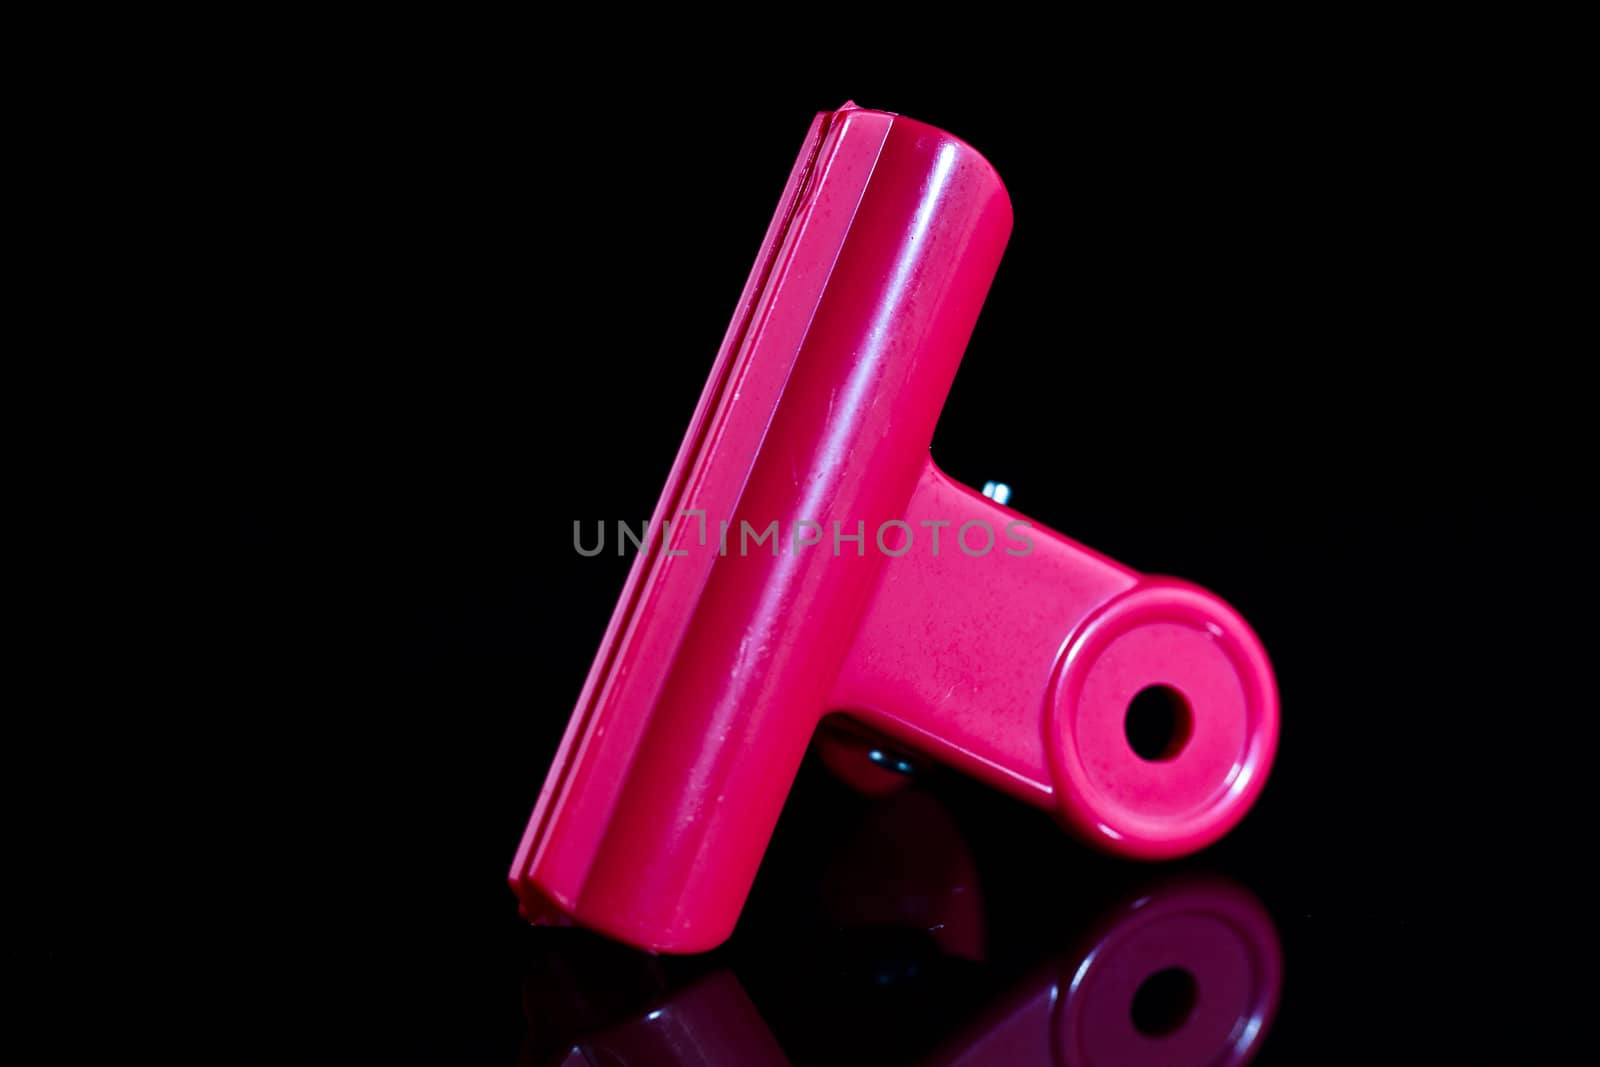 close up view of a  pink clamp on a mirror with dark background and mirror image